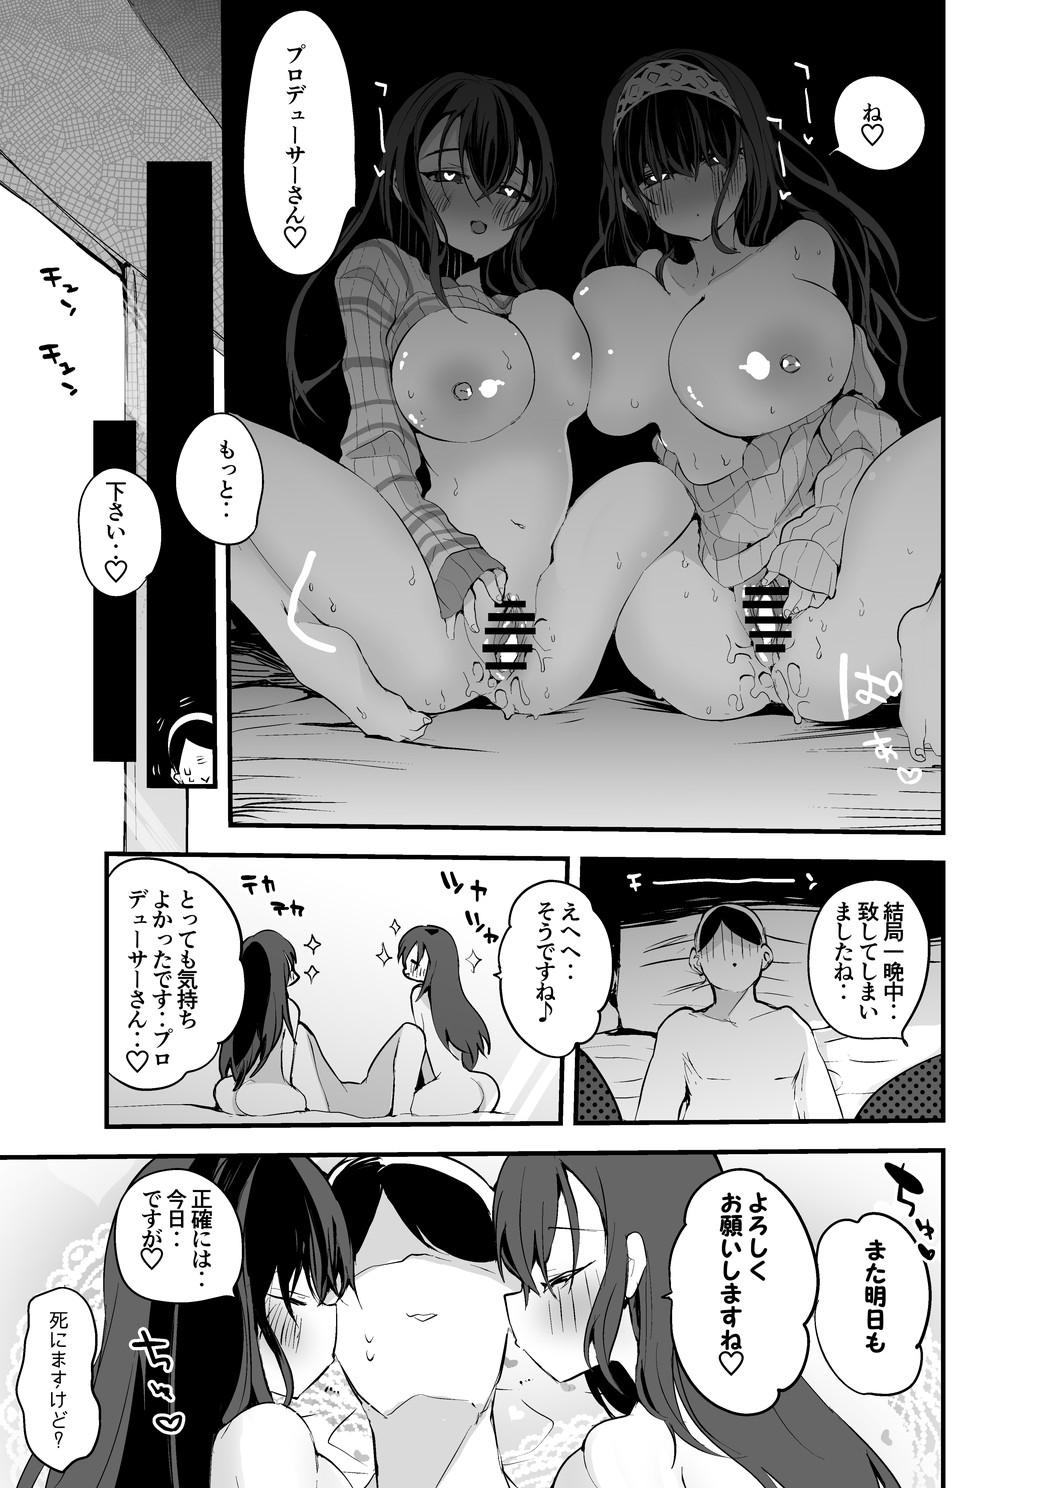 Special Locations 月下氷姫は襲いたい編 Sex Pussy - Page 6